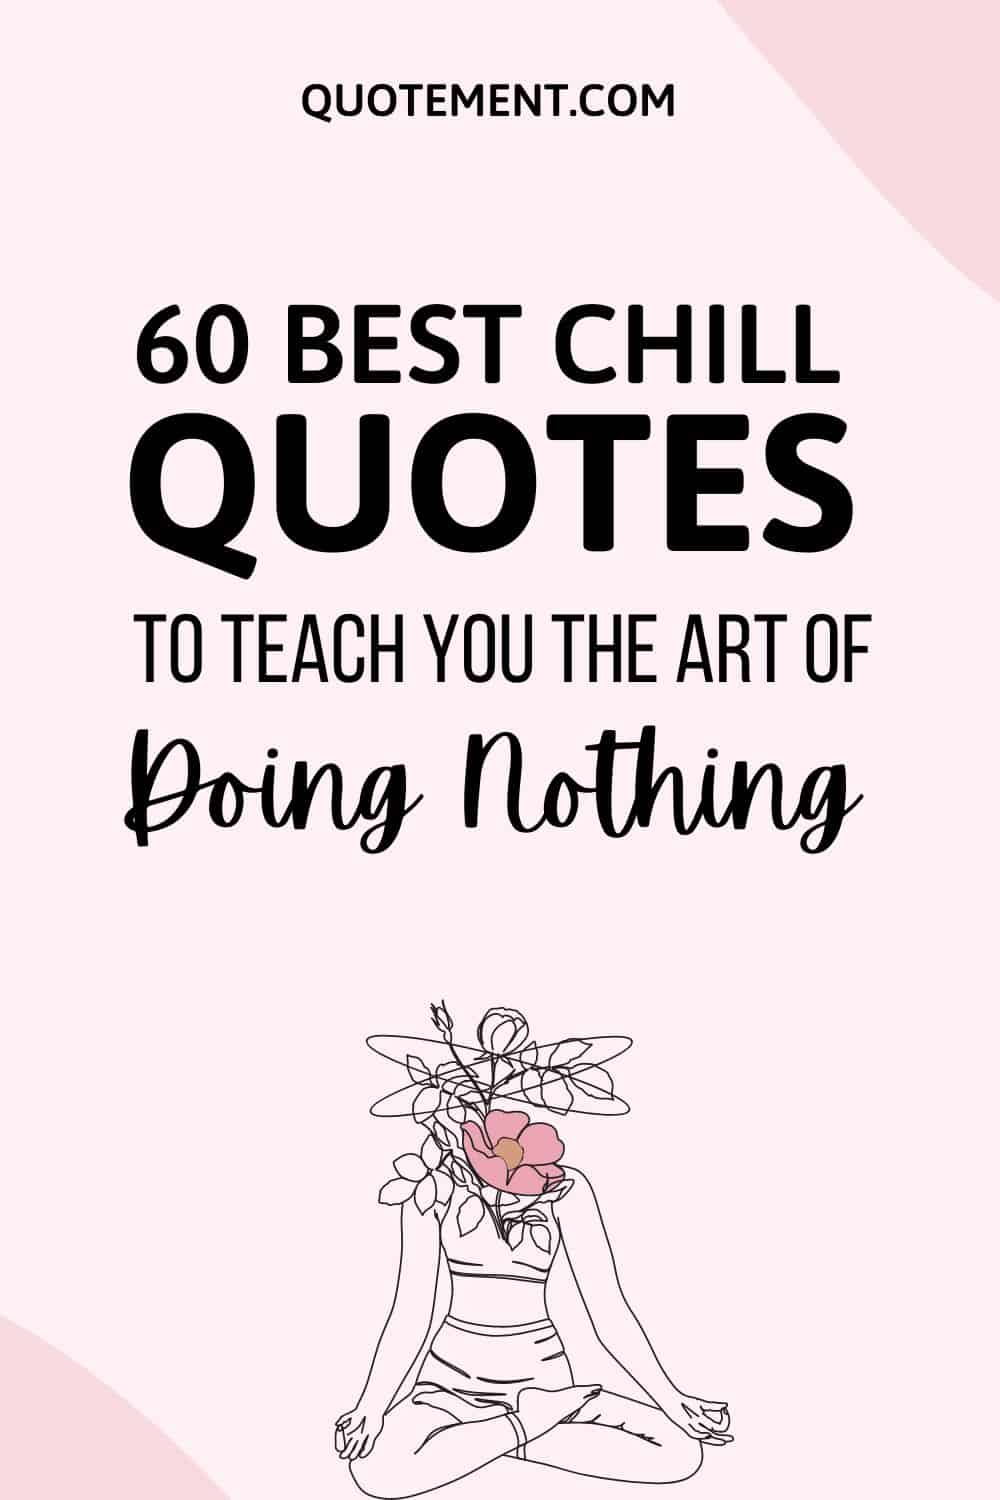 60 Best Chill Quotes To Teach You The Art Of Doing Nothing